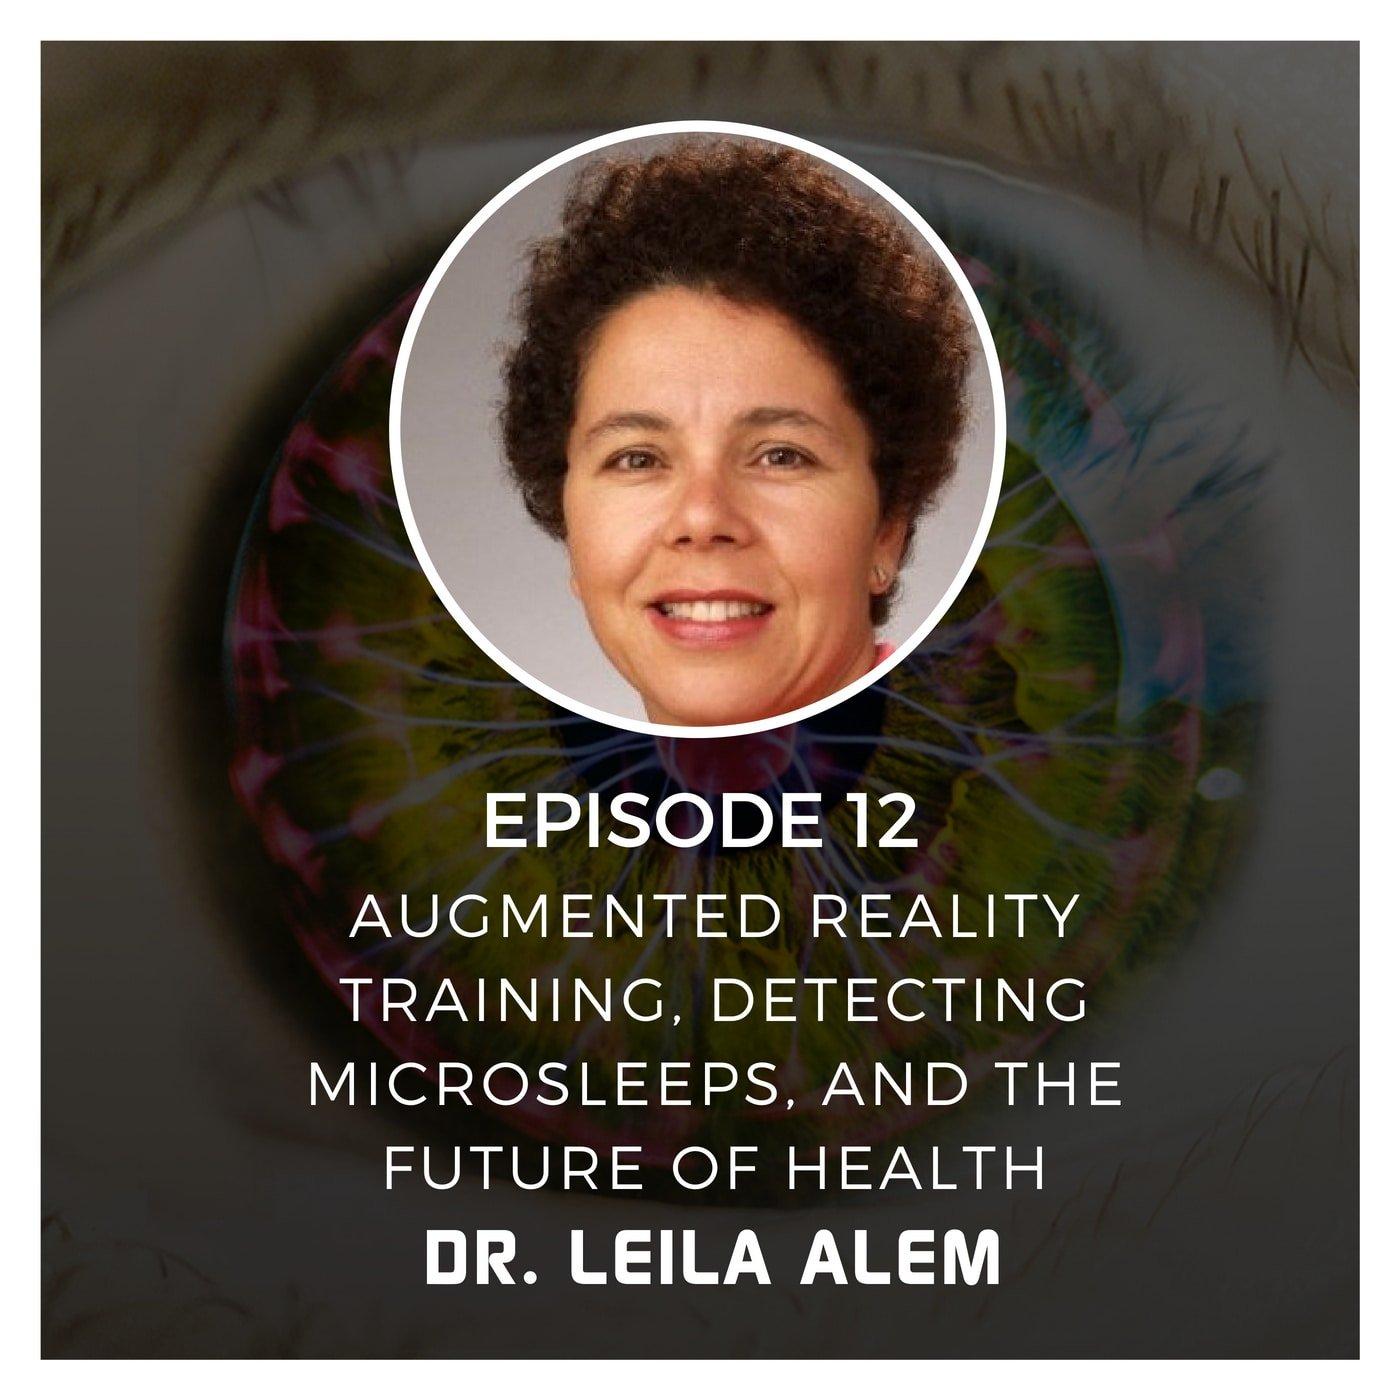 Augmented Reality Training, Detecting Microsleeps, and the Future of Health with Dr. Leila Alem - Episode 12